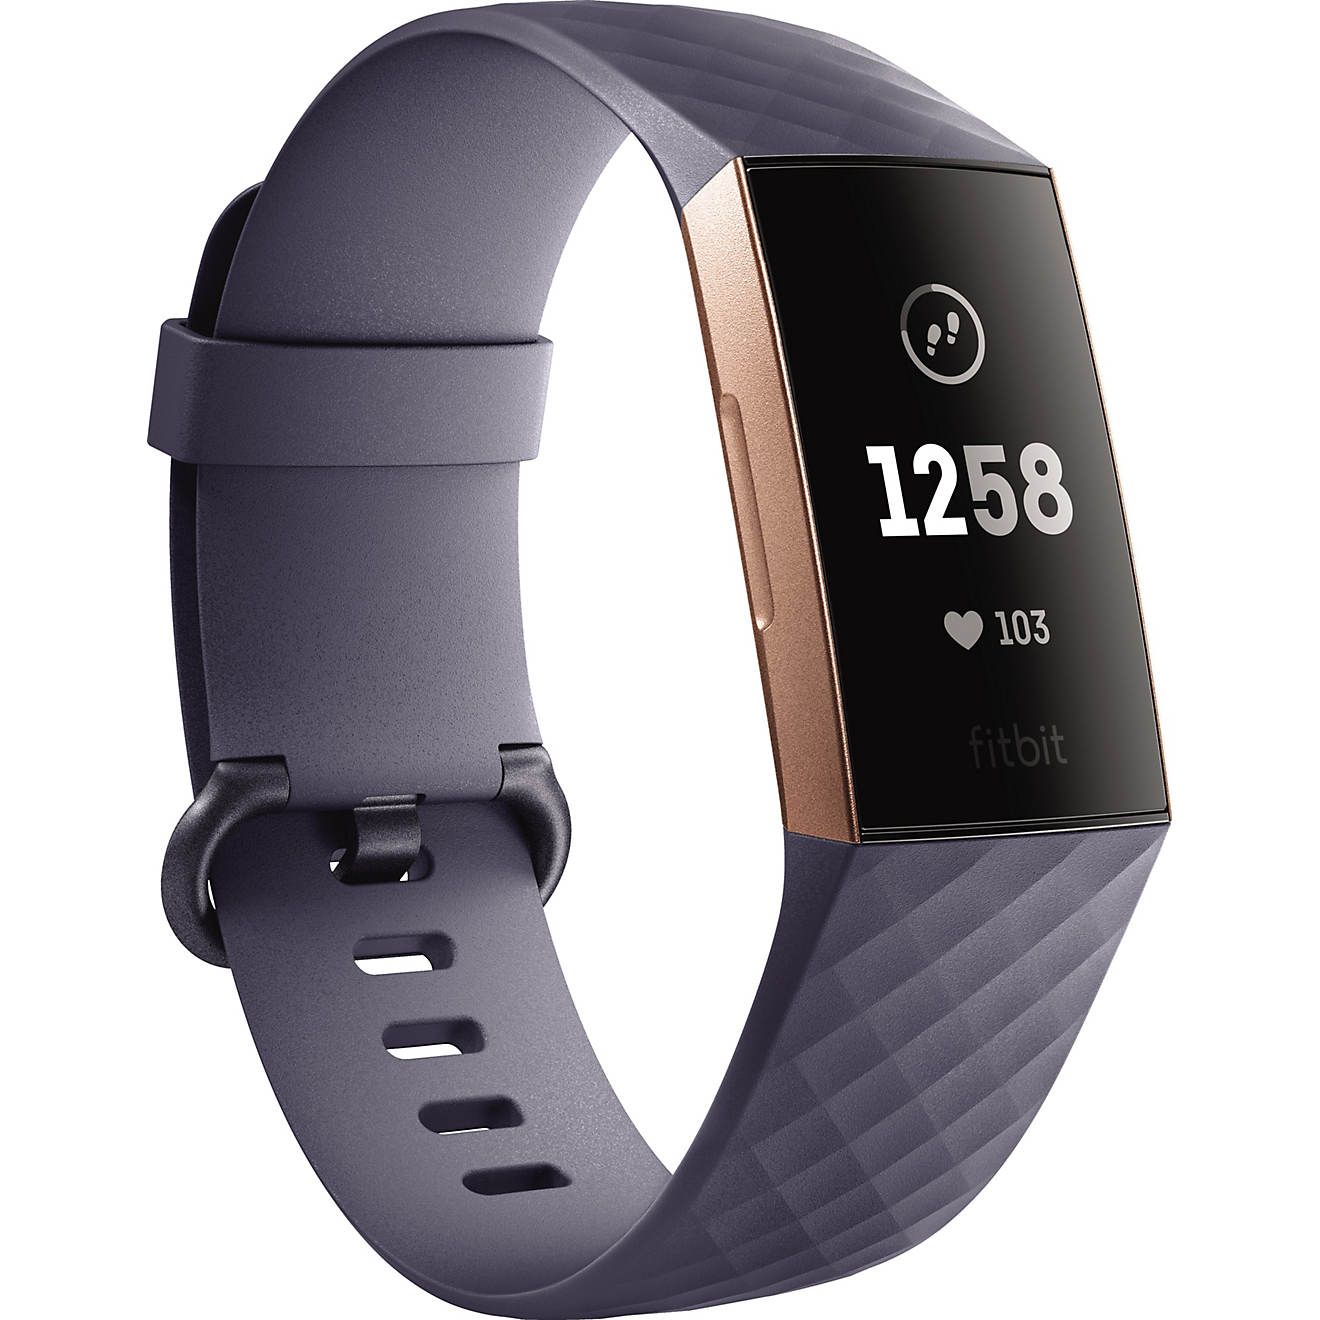 Fitbit Charge 3 Advanced Health and Fitness Tracker | Academy Sports + Outdoor Affiliate